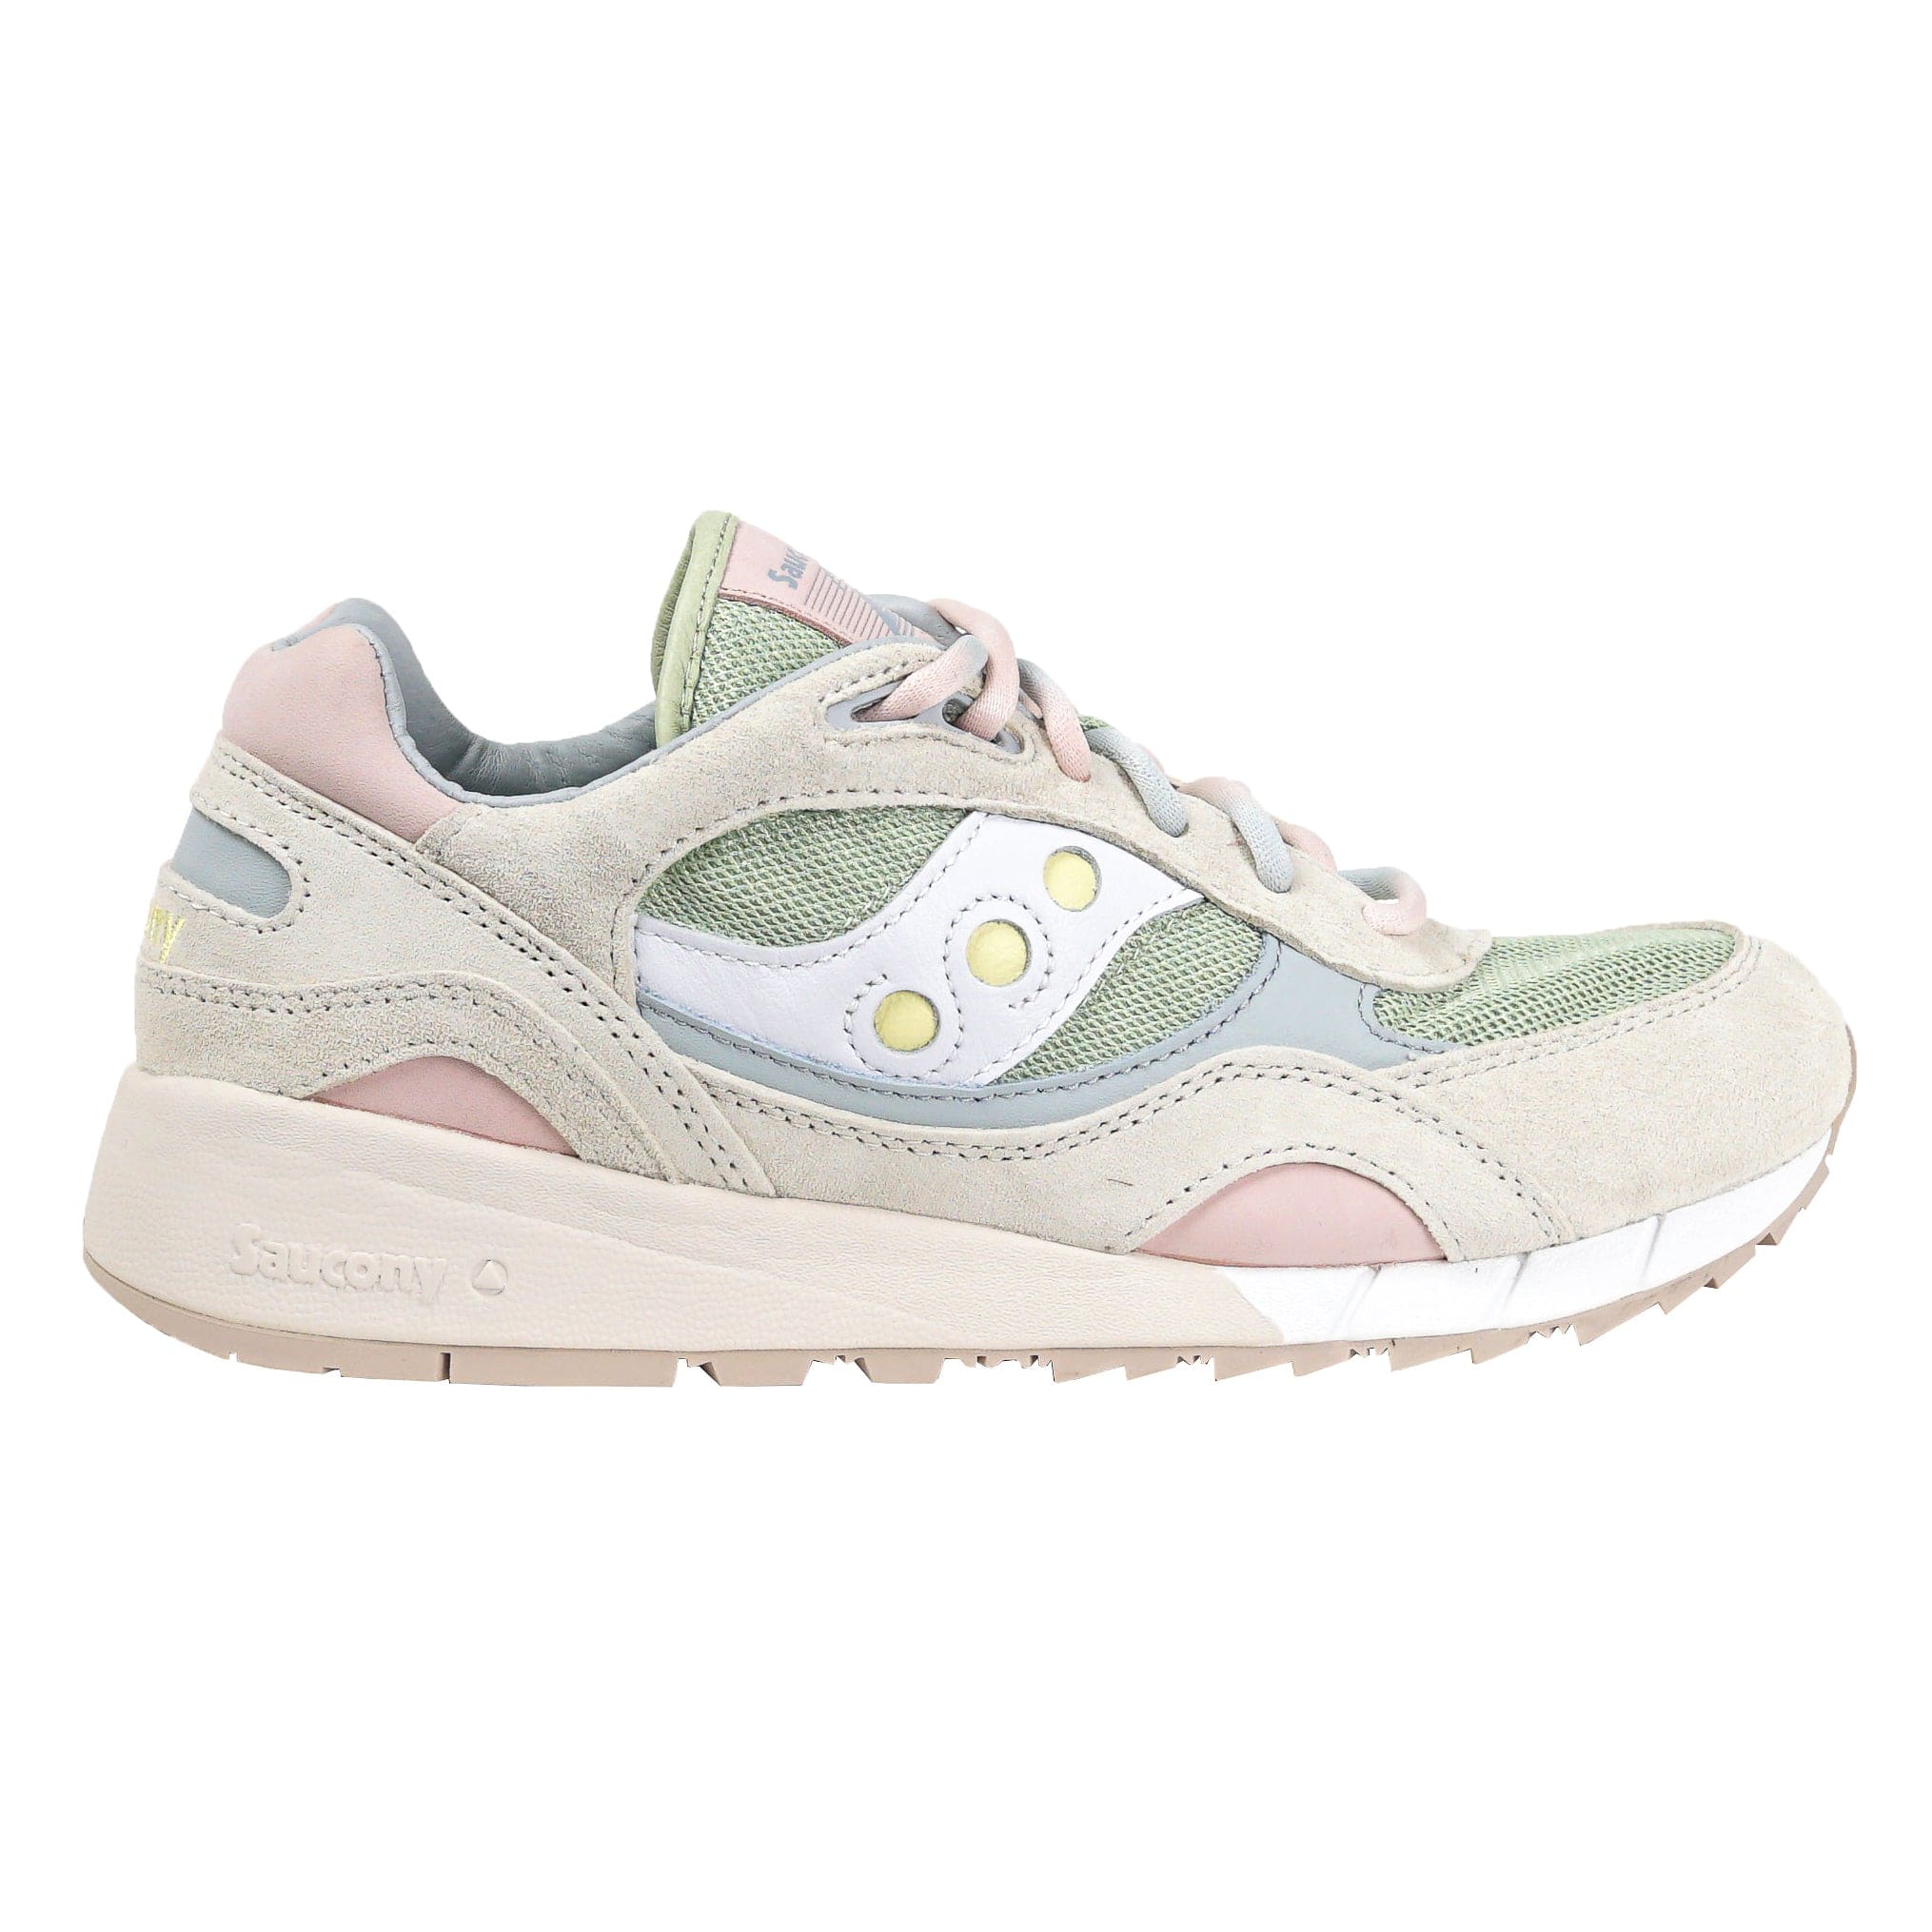 Shadow 6000 in white and green - Saucony - State Of Flux